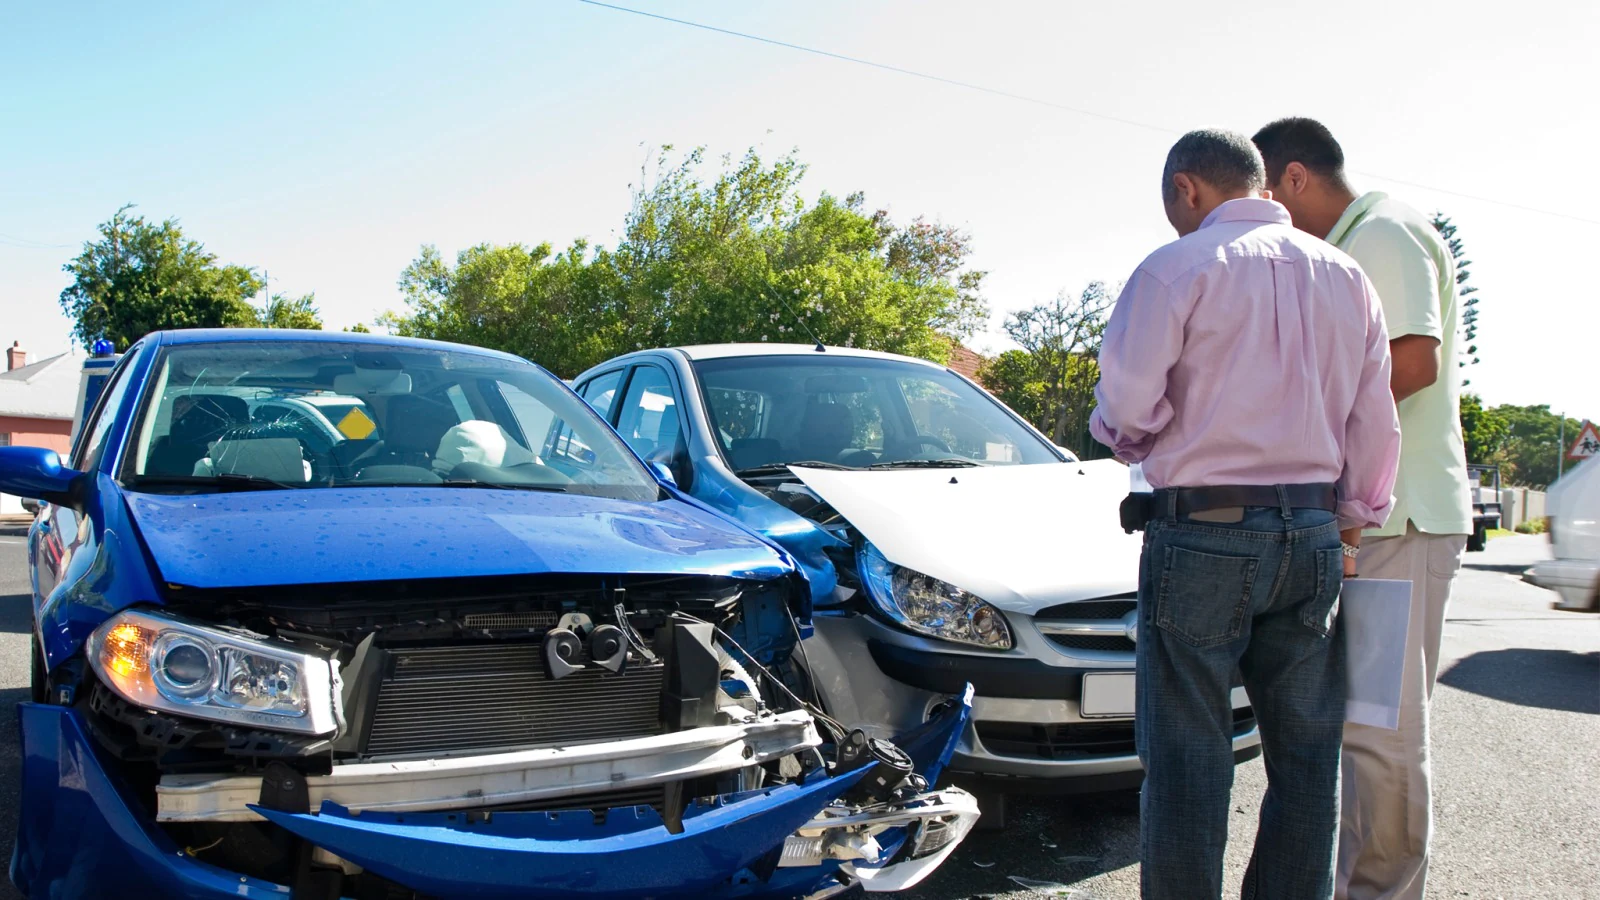 4 Tips That Will Help You Select the Right Auto Appraisal Company